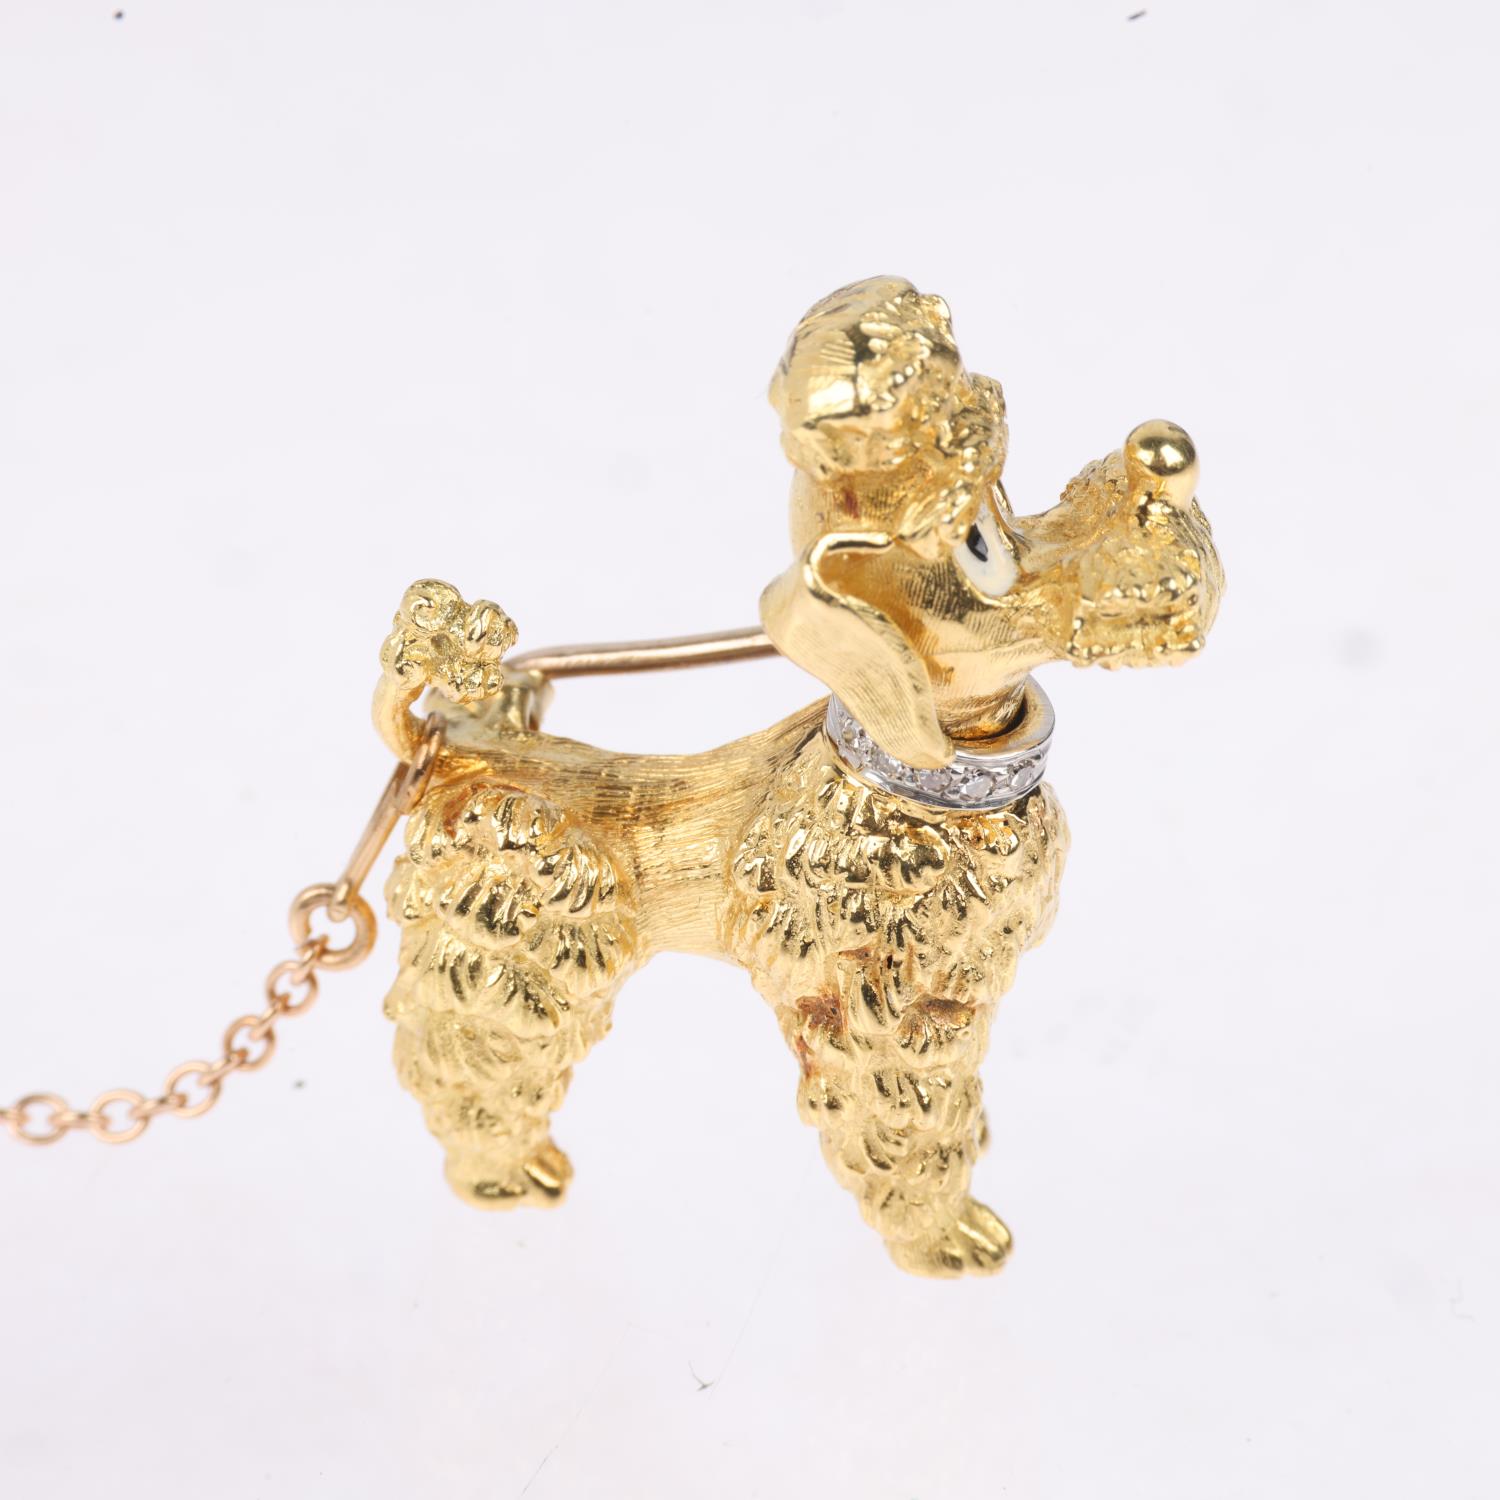 An 18ct gold diamond and enamel Poodle dog brooch, Ben Rosenfeld Ltd, London 1963, realistically - Image 3 of 4